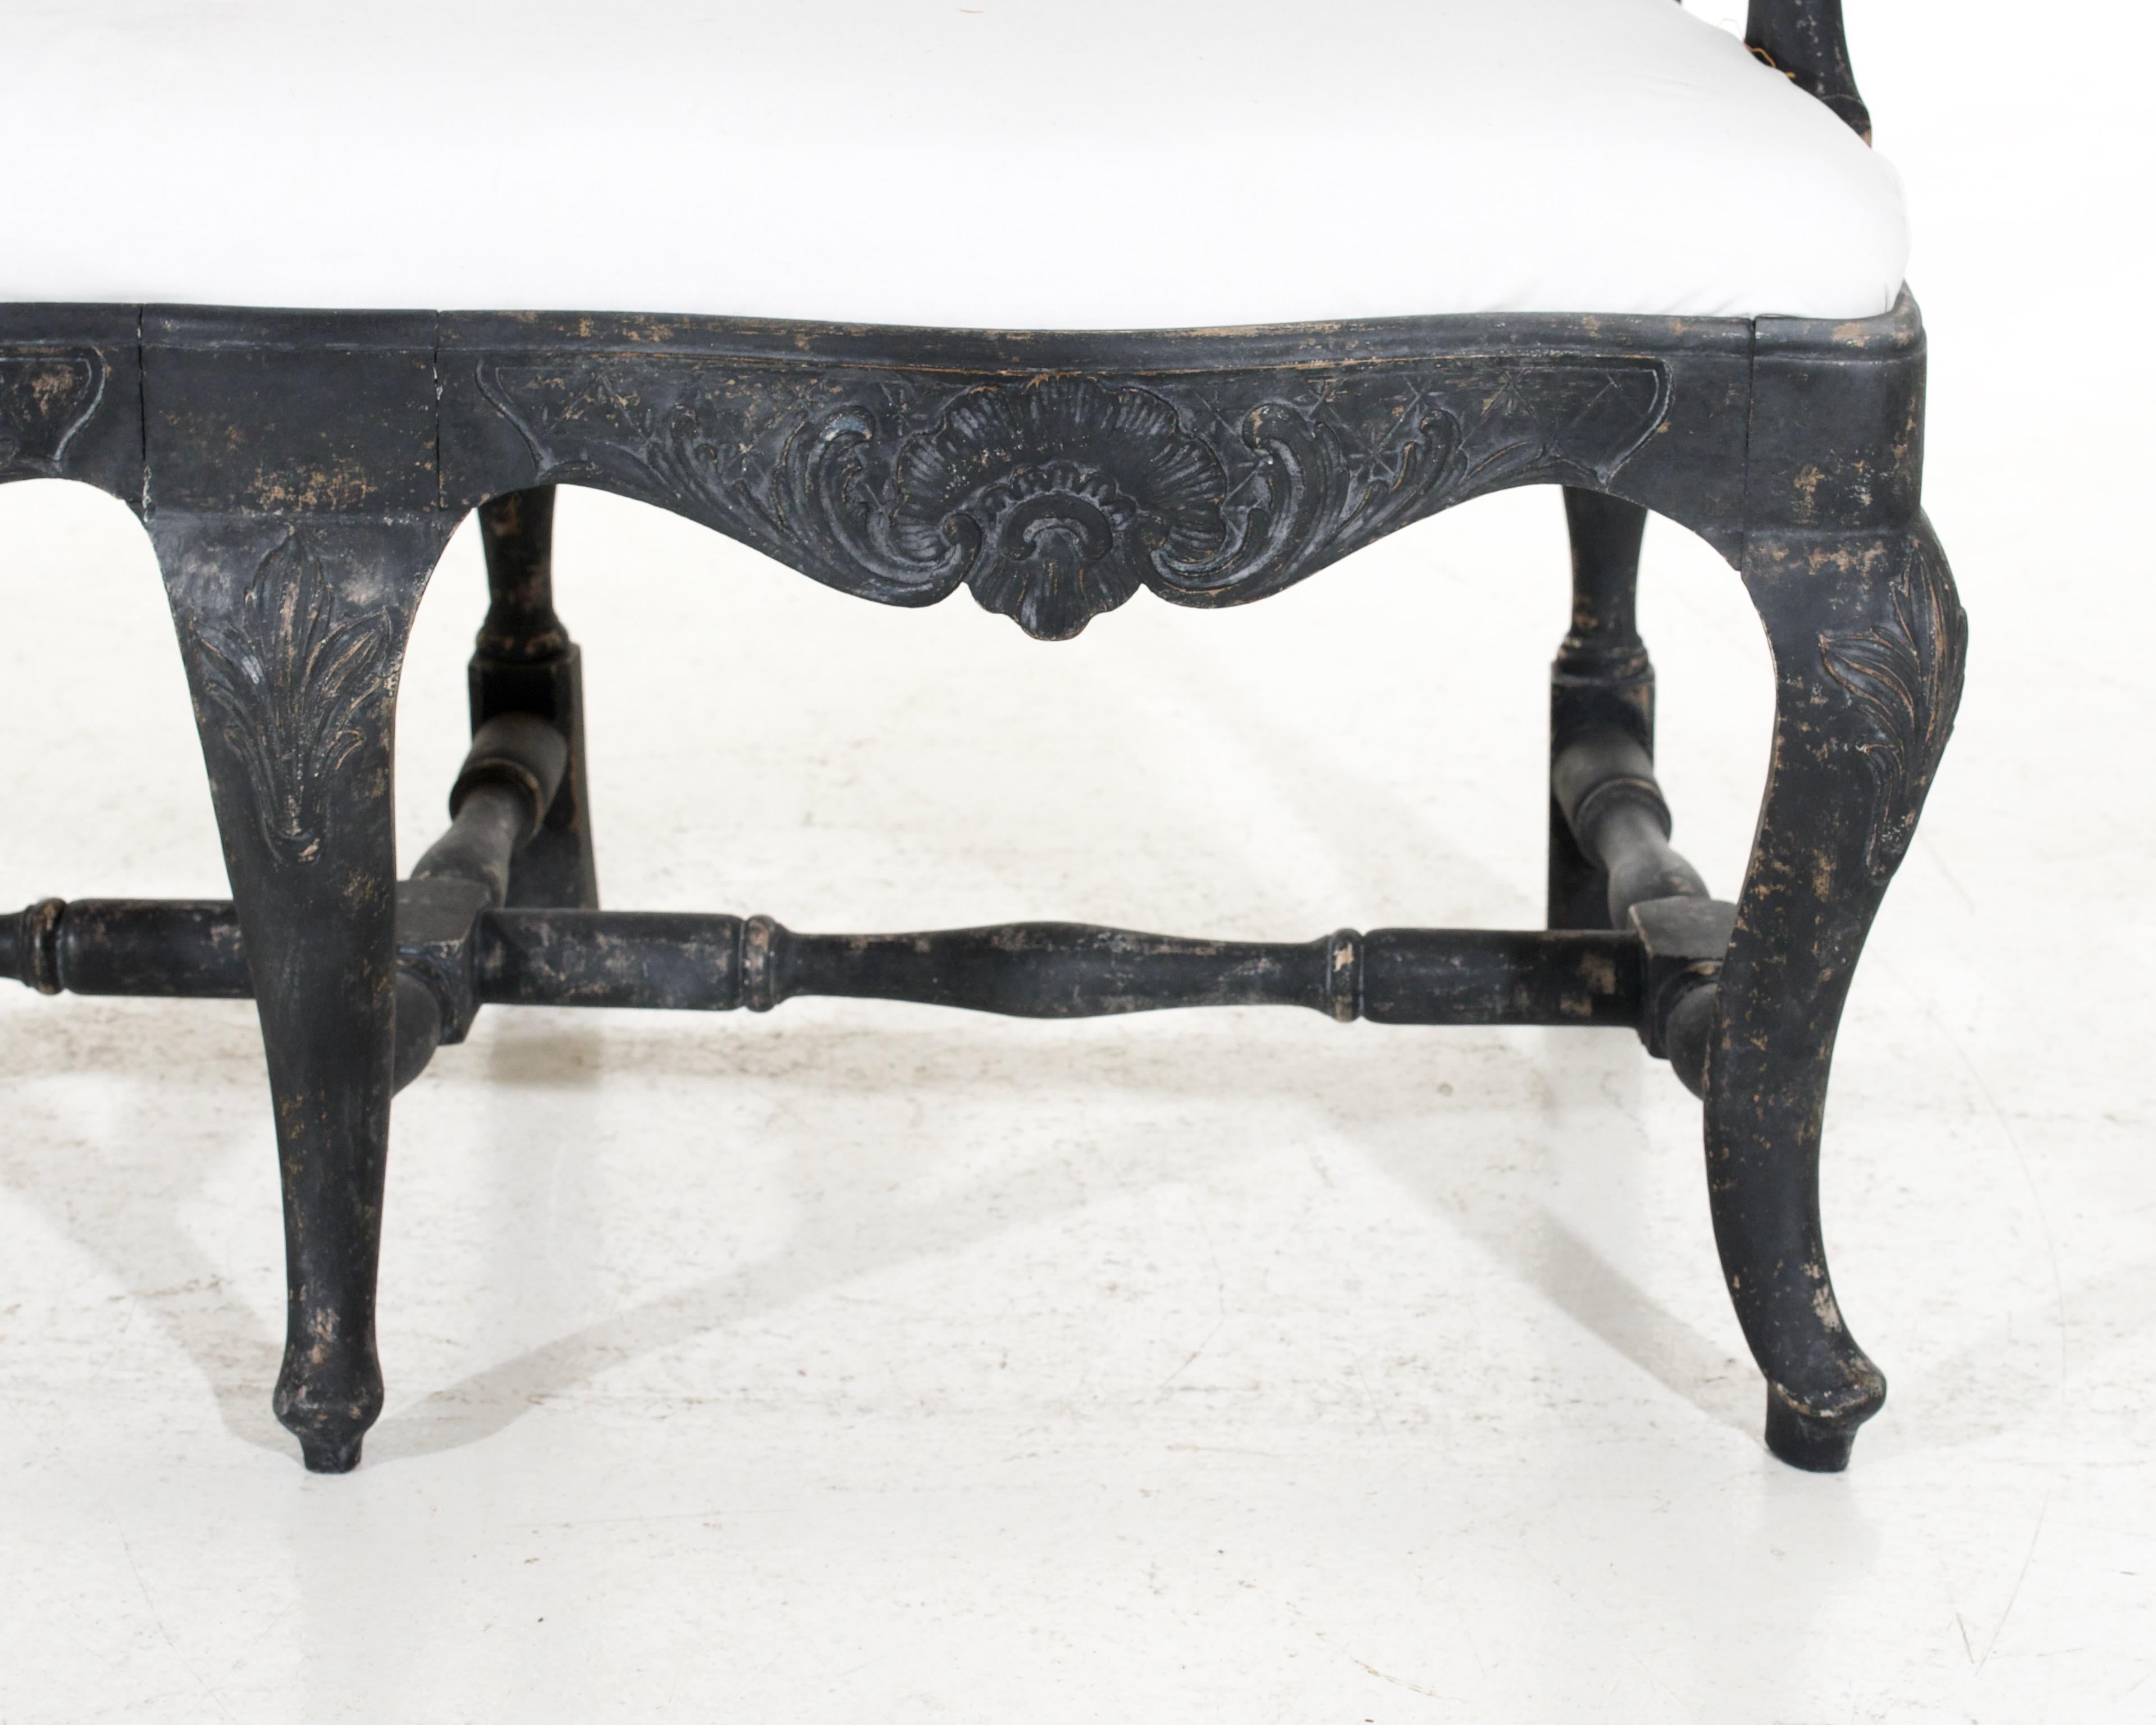 This beautiful three seat sofa-bench was crafted in Sweden over 100 years ago in the classic Rococo style. It features intricate carved detailing, ornate curves and rich upholstery that will bring a touch of elegance to any home.